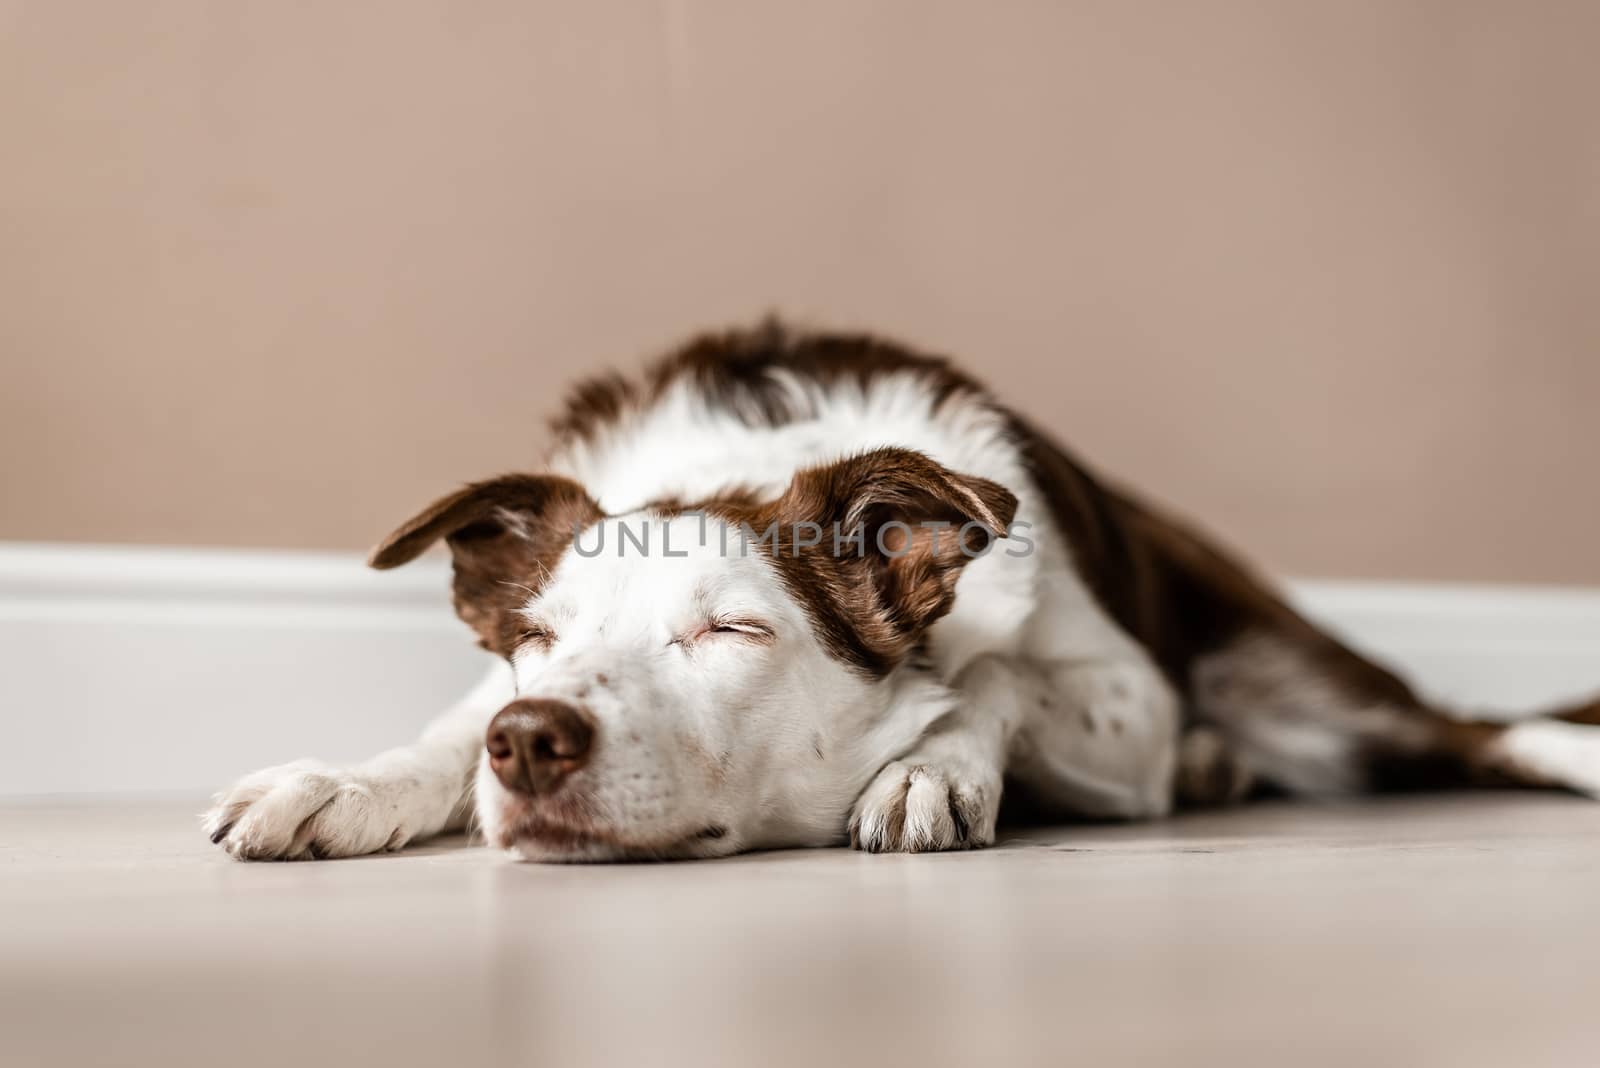 Cute brown and white Border Collie lays on the floor inside a house with her eyes closed. Lazy day, calm, sleeping dog by Pendleton